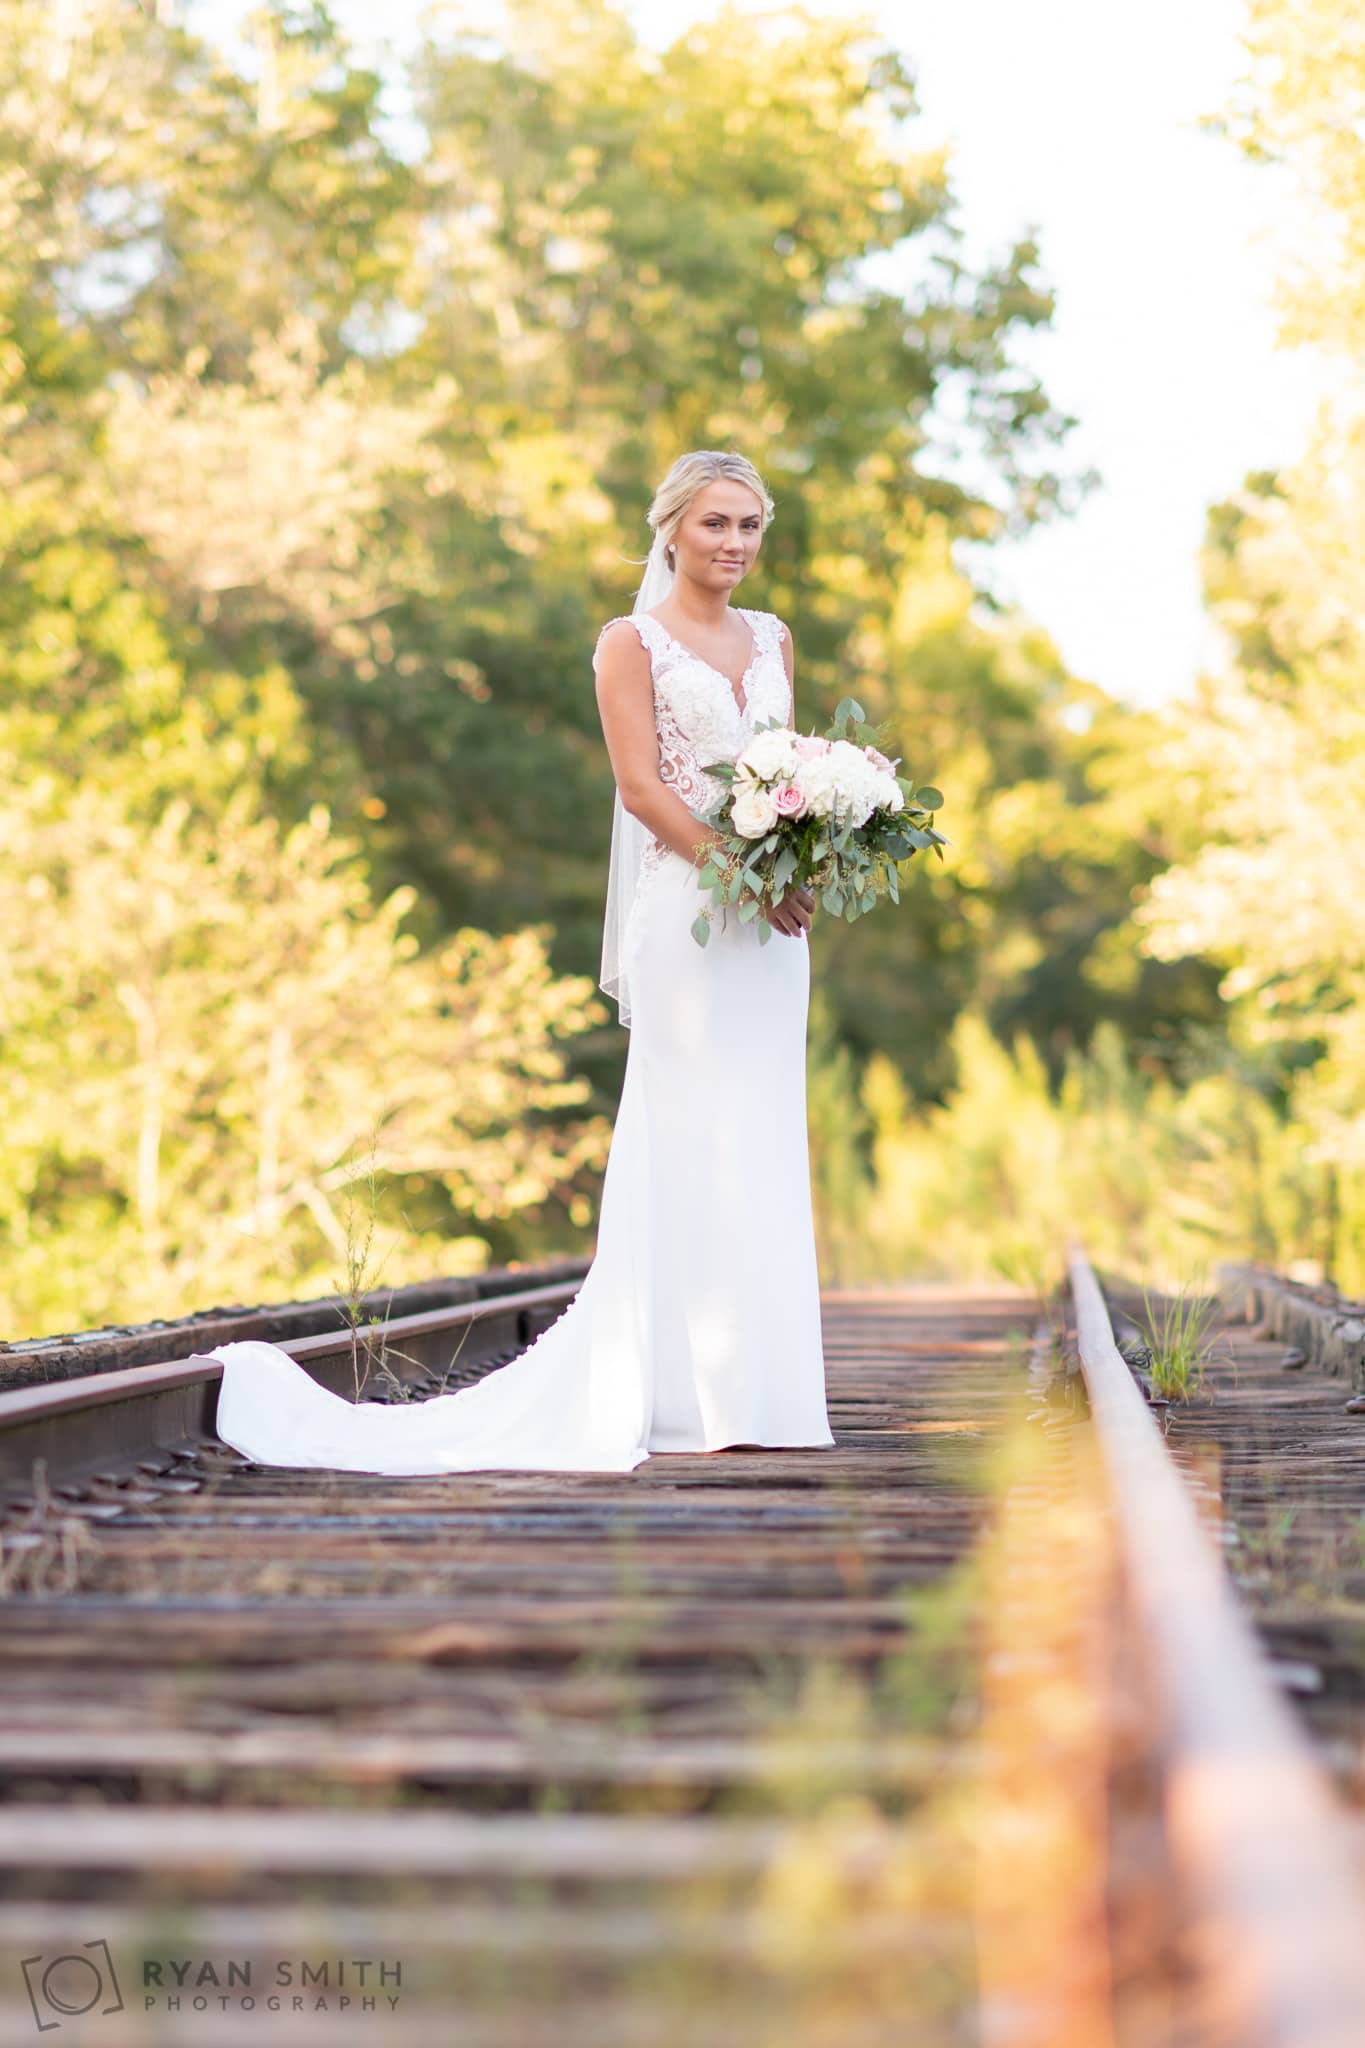 Bride on train tracks holding bouqeut - Conway River Walk